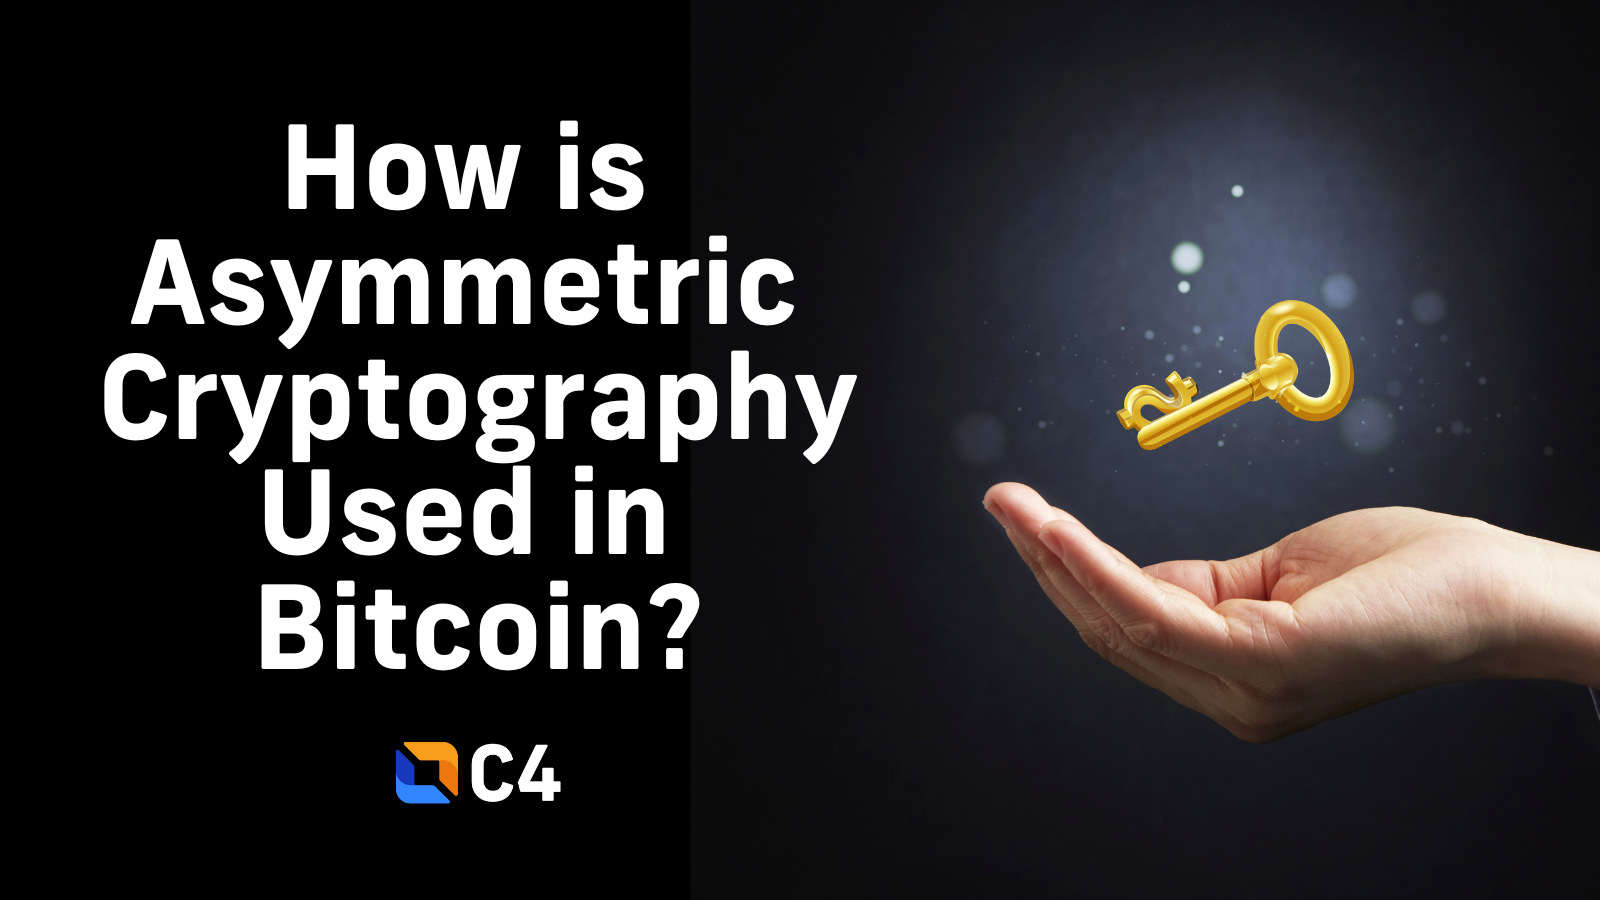 What Is Asymmetric Cryptography? And How Is it Used in Bitcoin?